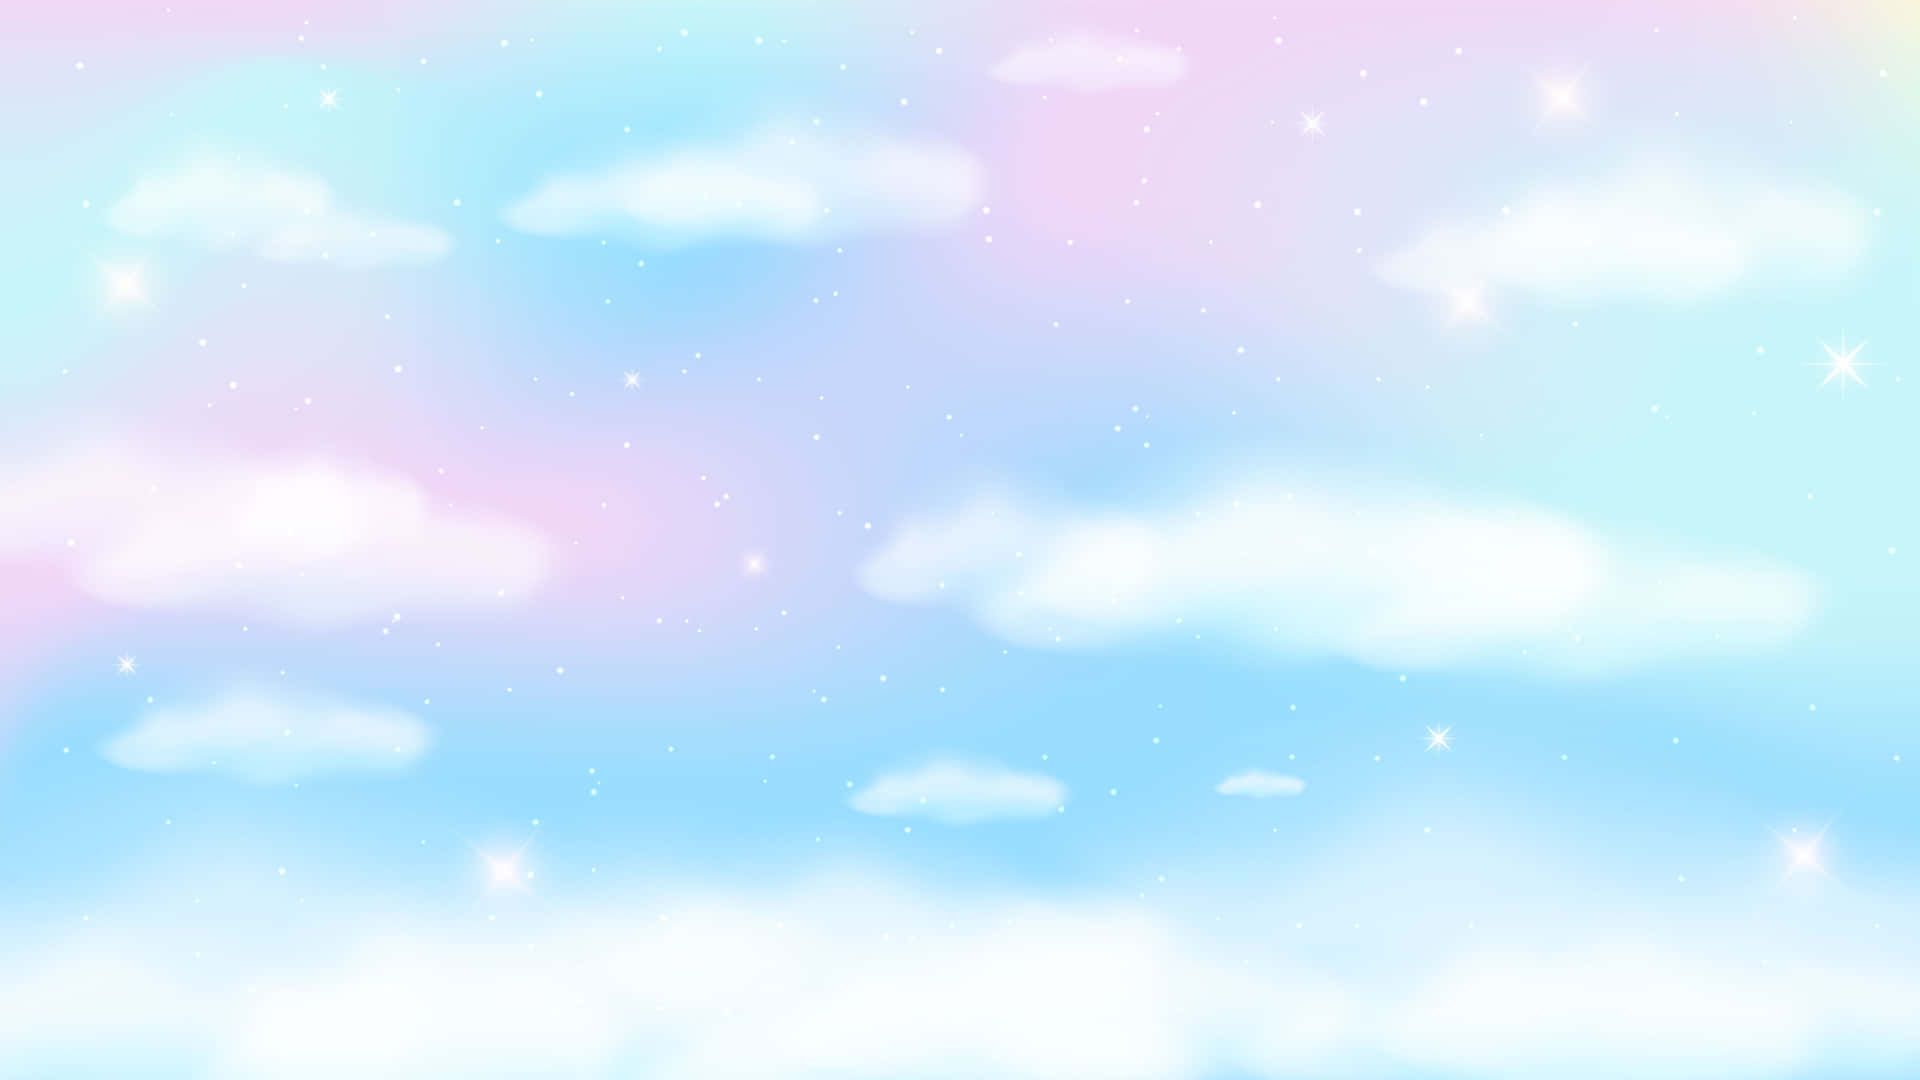 Enjoy the beautiful pastel colors of this cute background